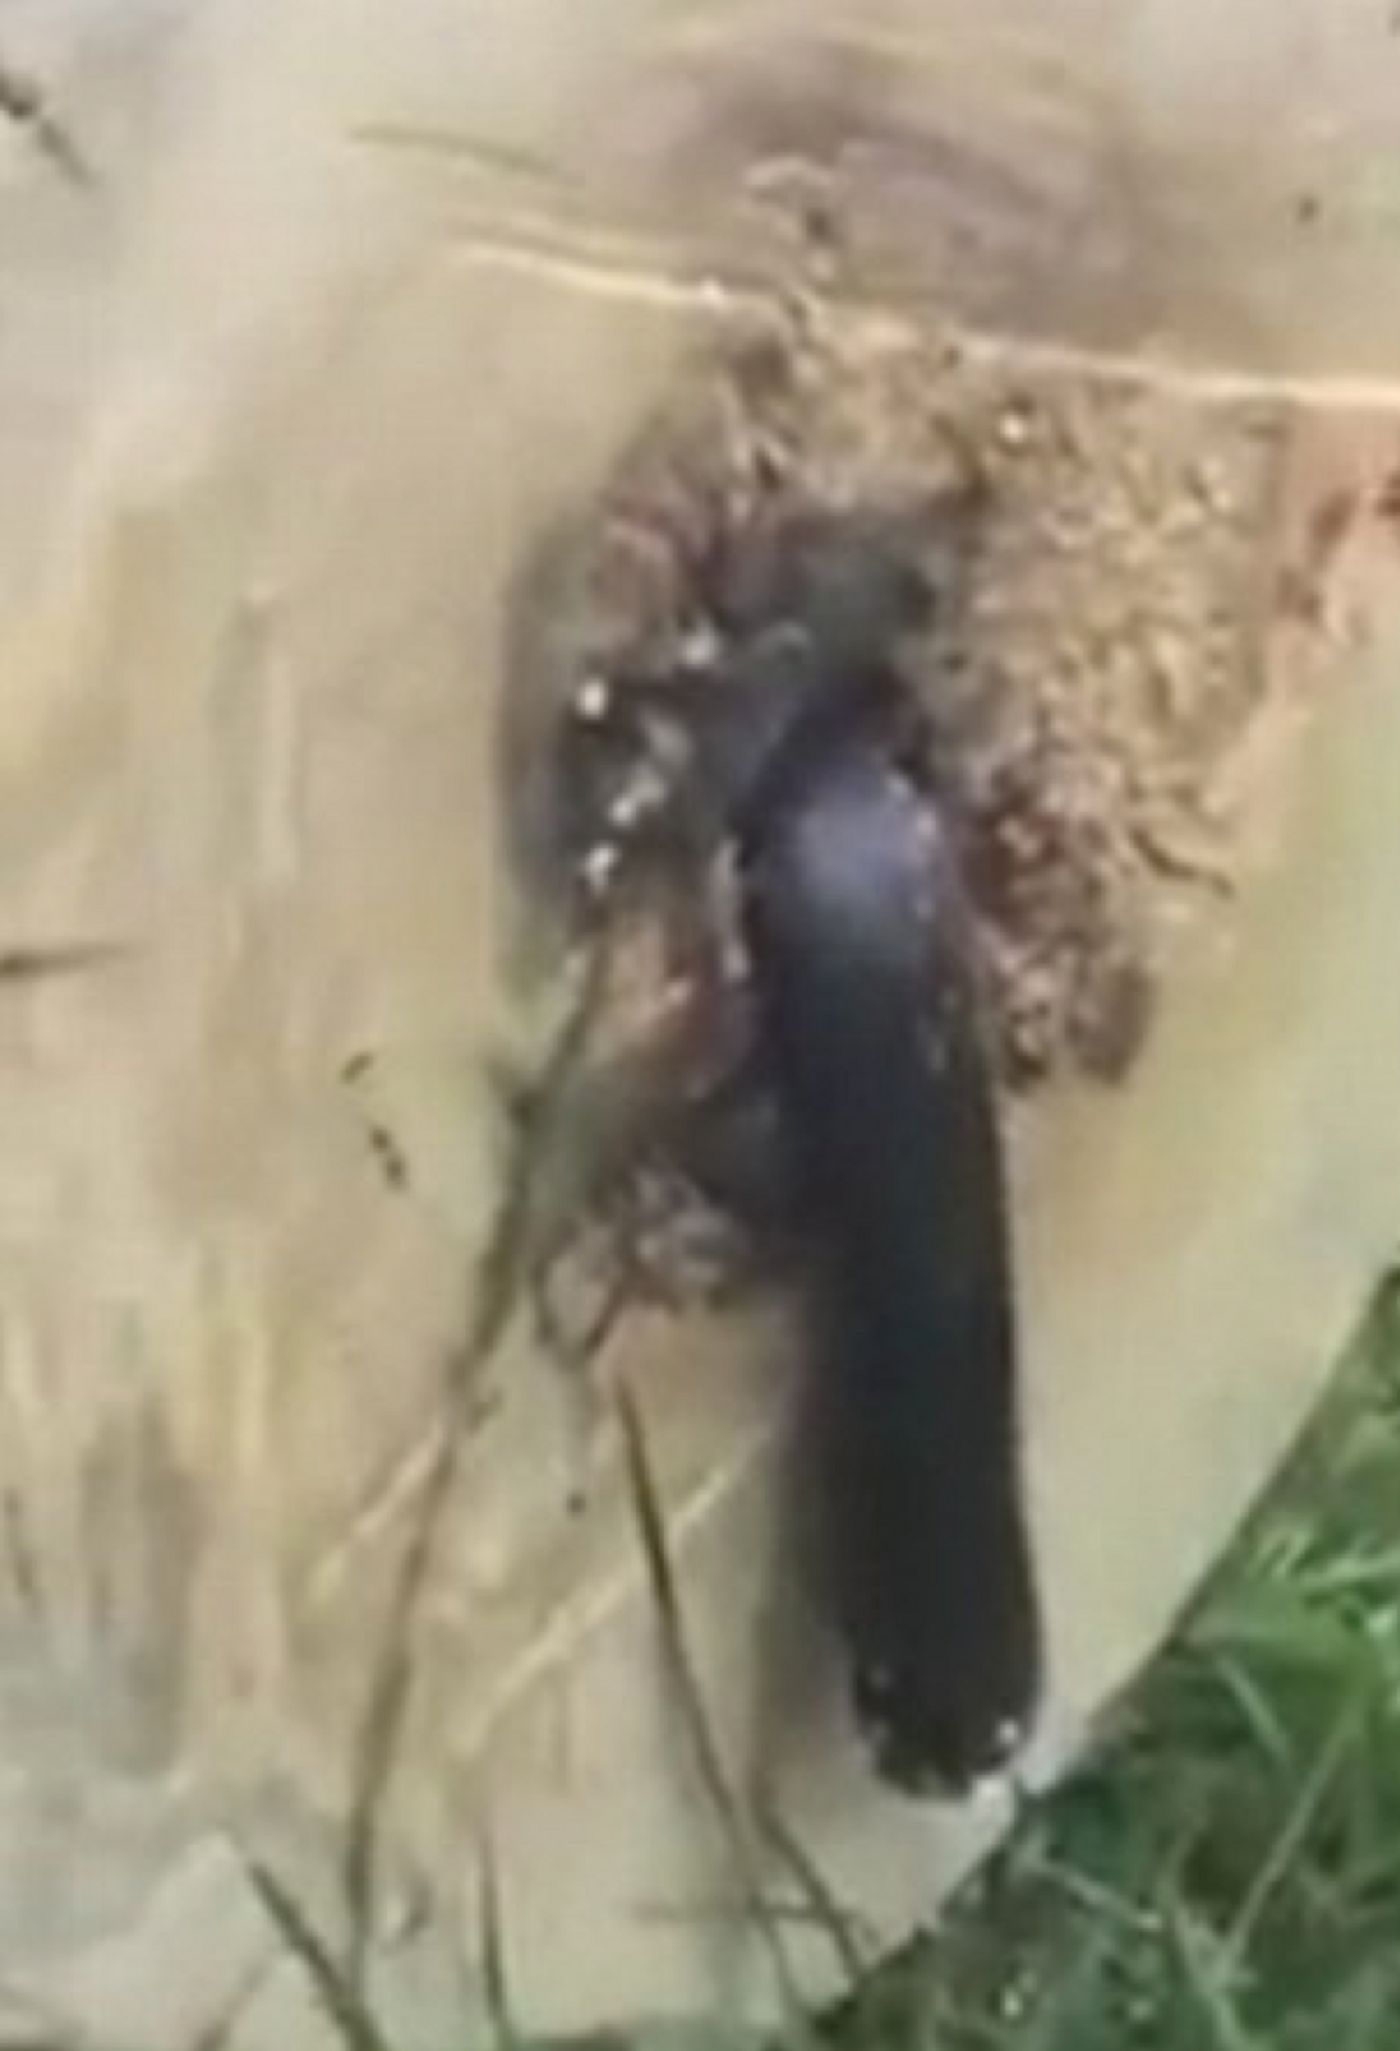 A black snake is found chopped in half while a man cuts a tree trunk in half.